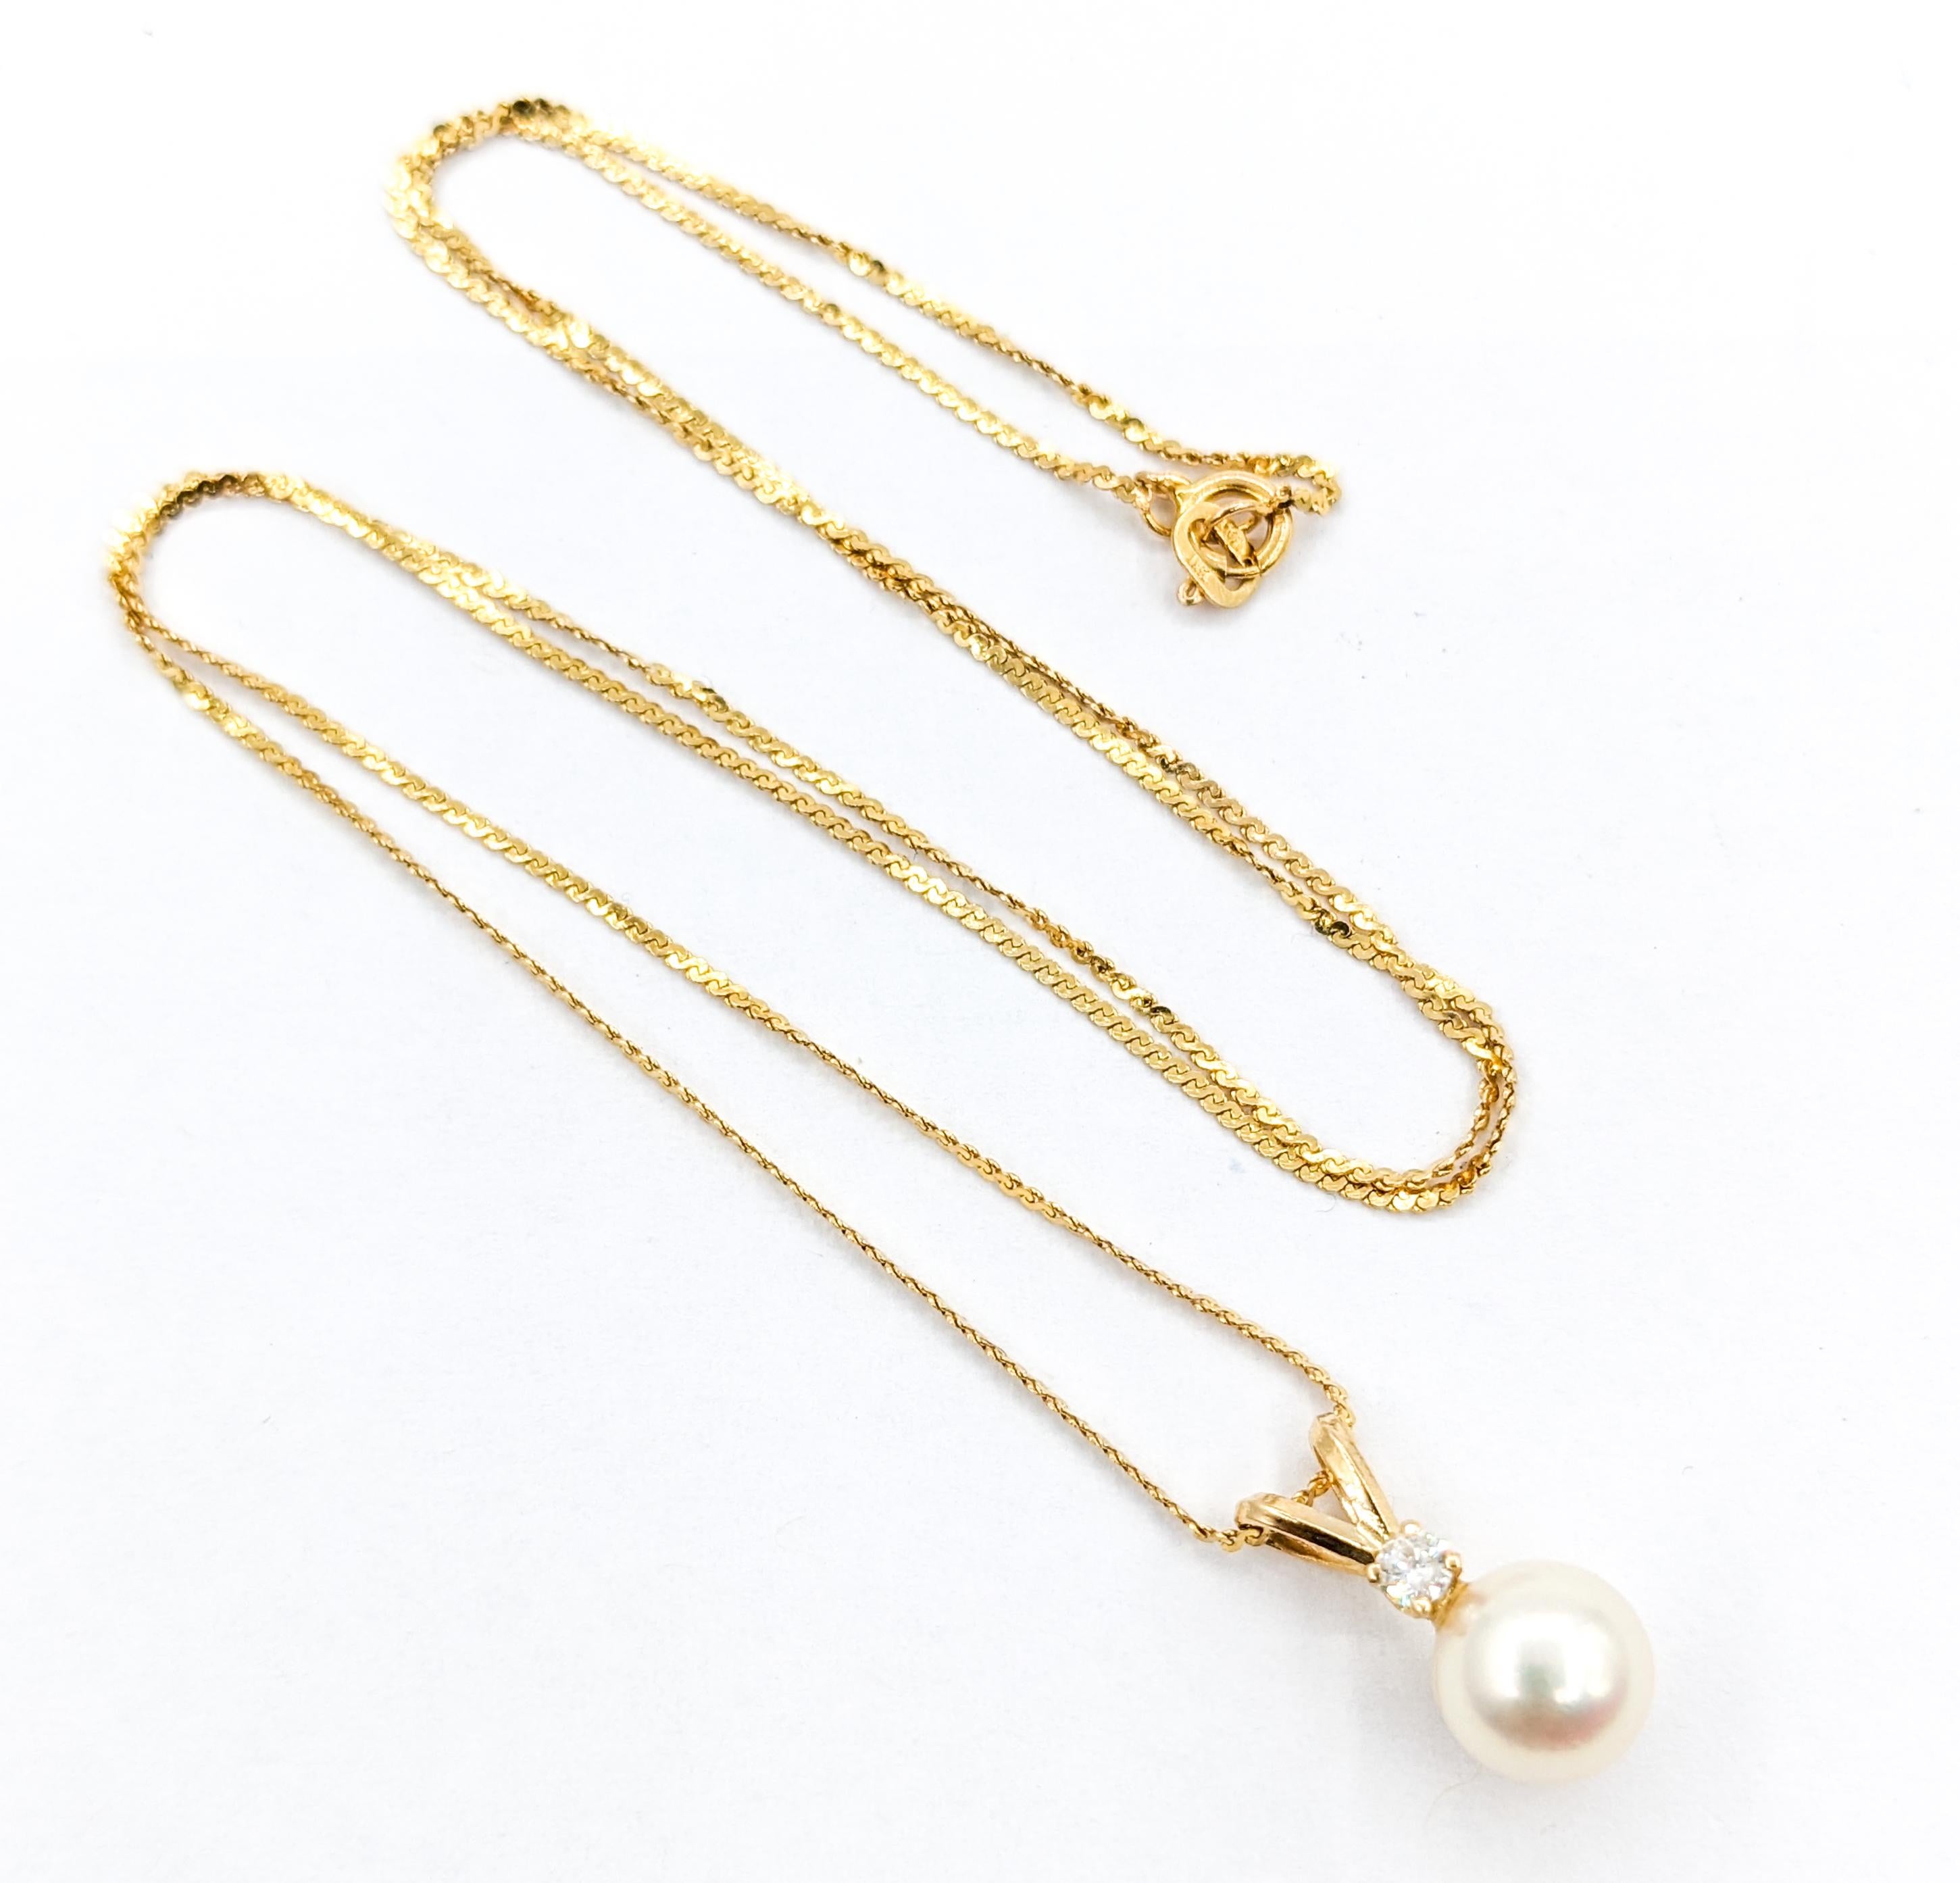 Akoya Pearl & Round Diamond Necklace Yellow Gold

Introducing this drop pearl necklace, expertly crafted in 14kt yellow gold, adorned with a 0.06ct round diamond. The diamond, sparkling with I clarity and a near-colorless white shade, adds a touch